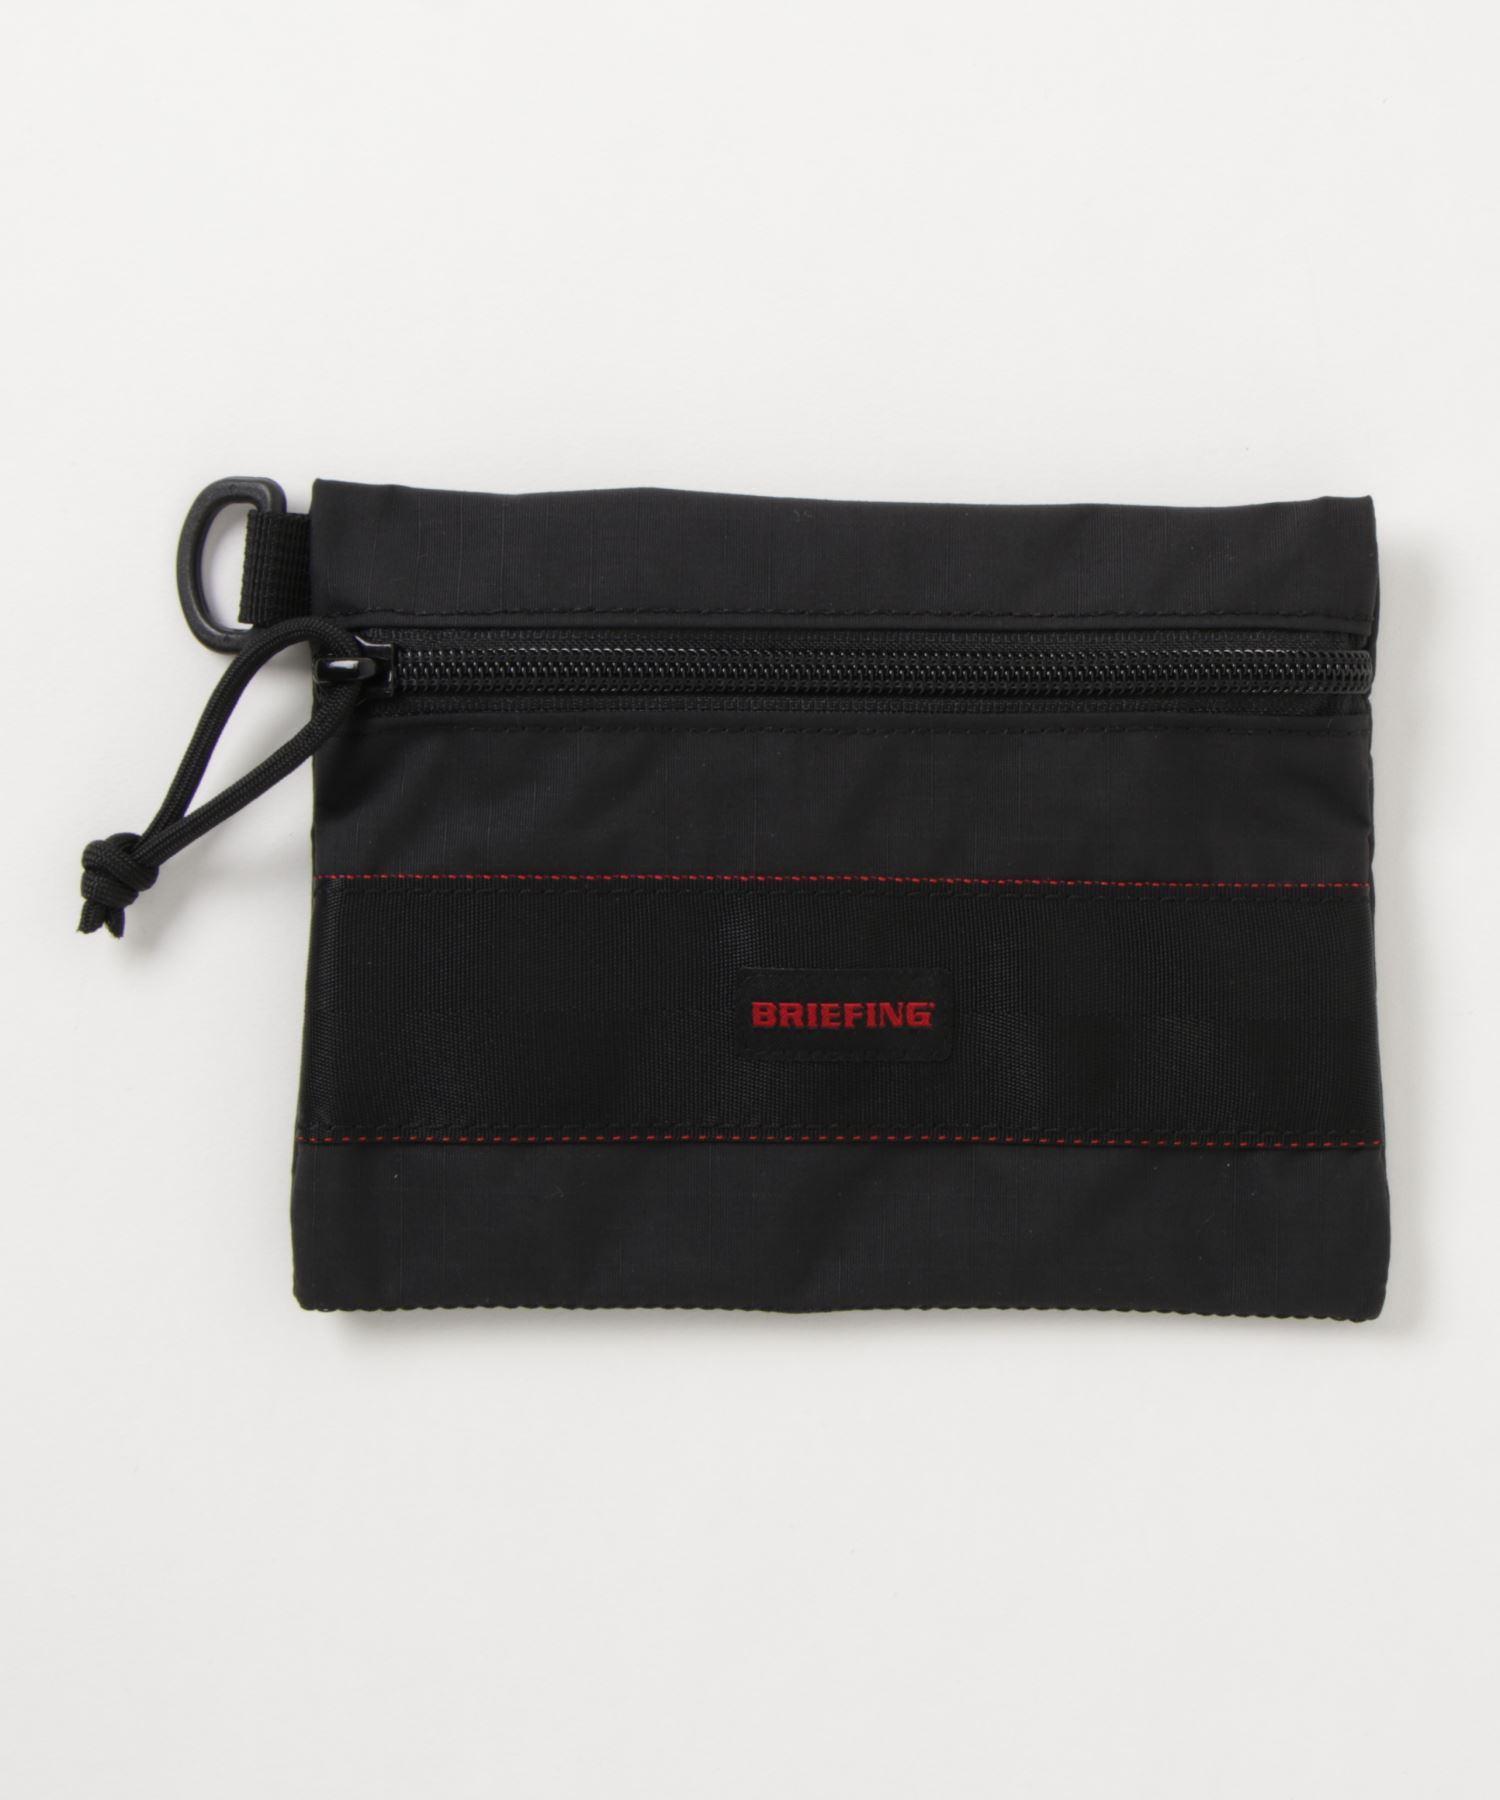 BRIEFINGFLAT POUCH 【受注生産品】 74%OFF M MW フラットポーチ